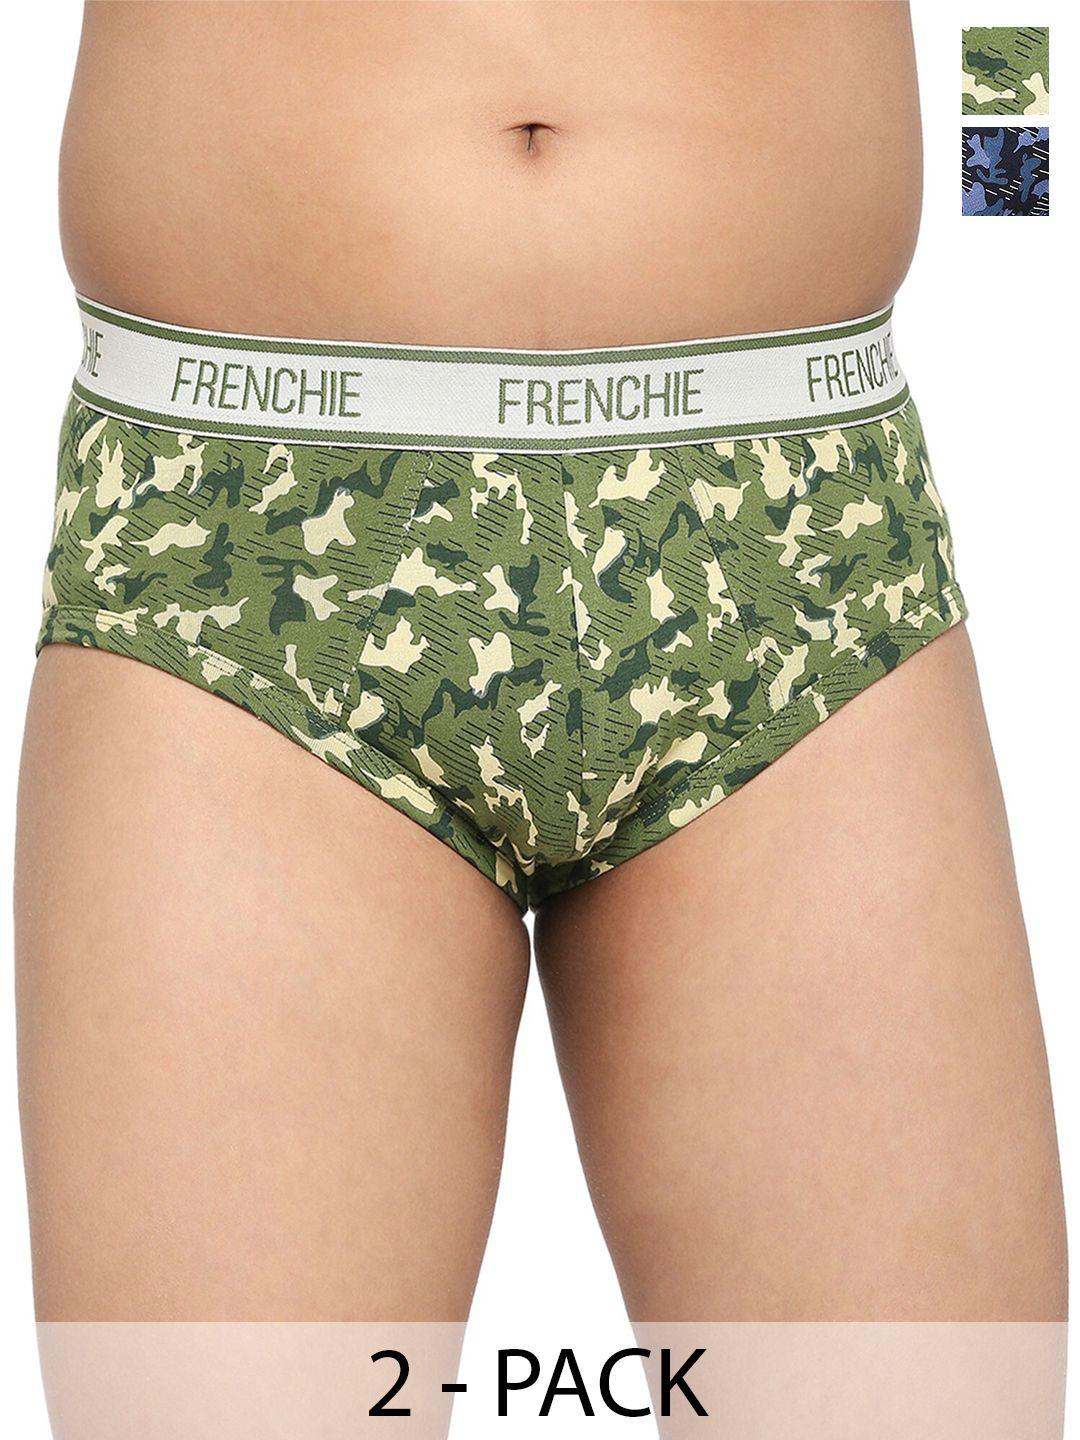 frenchie boys pack of 2 abstract printed mid-rise cotton basic briefs fr-bf-u1904-1x5